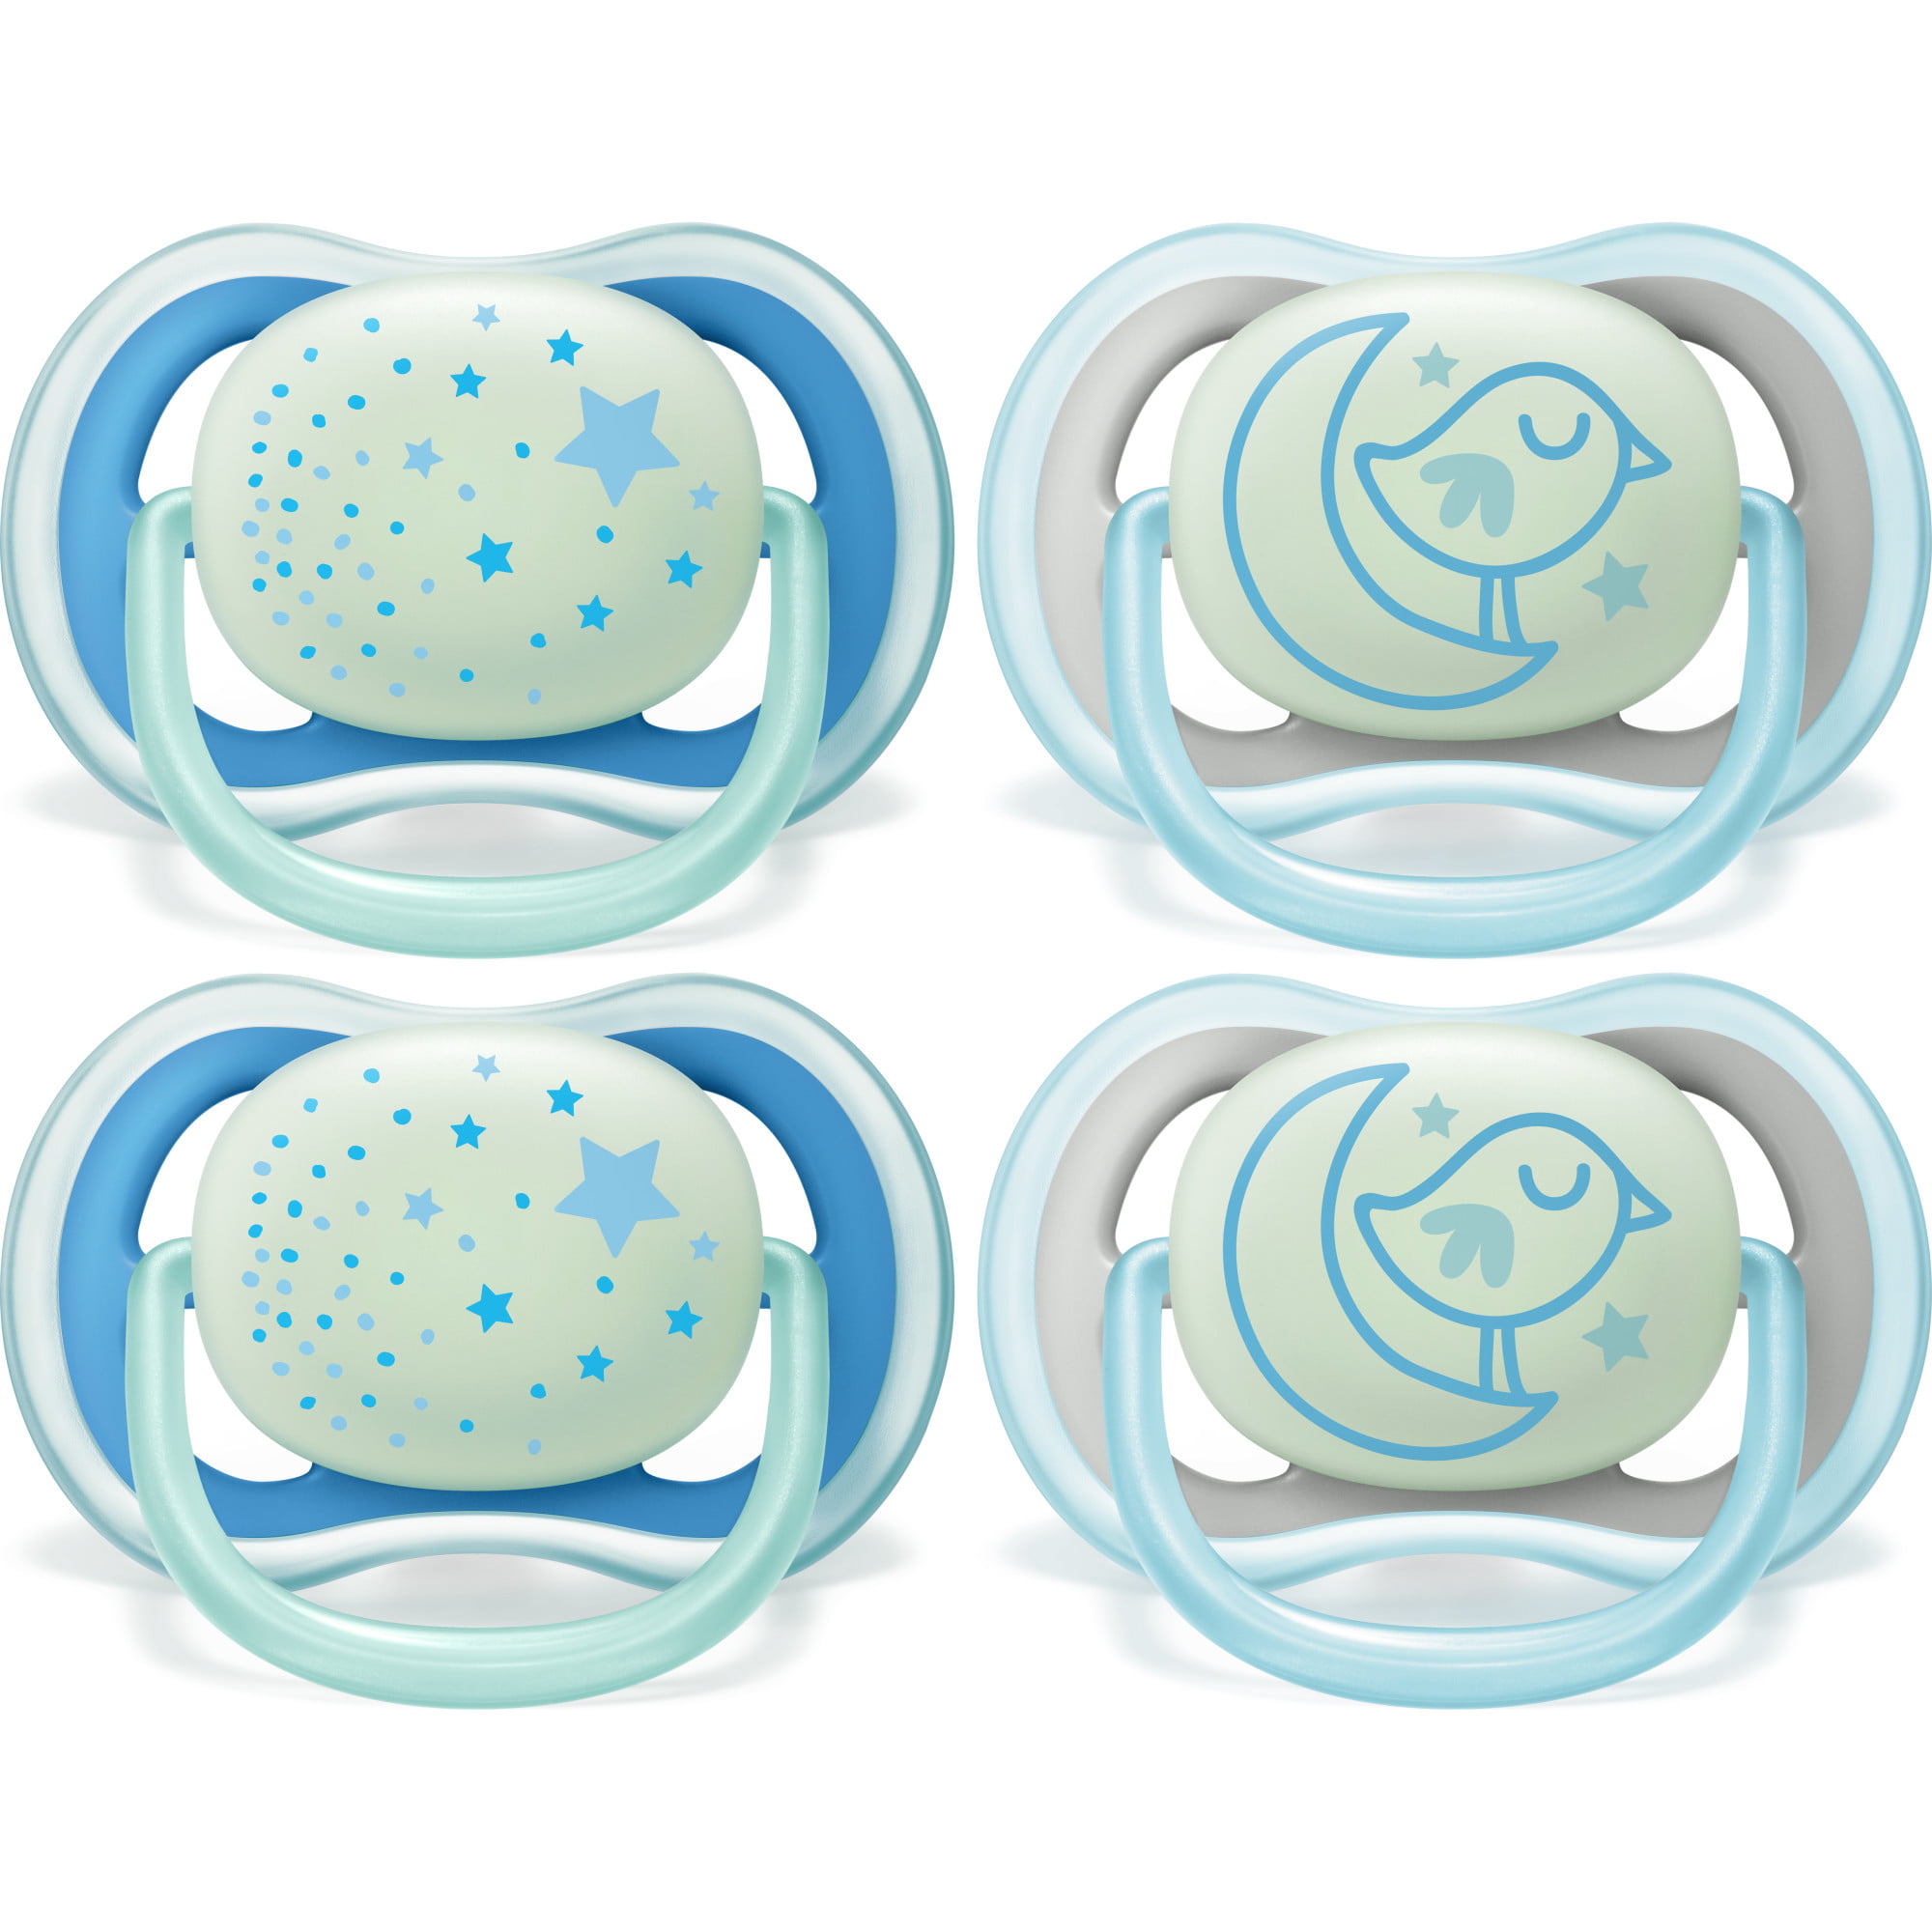 2/Pack 0-6 months Assorted Colors Lot of 4 Phillips Avent Nighttime Pacifier 